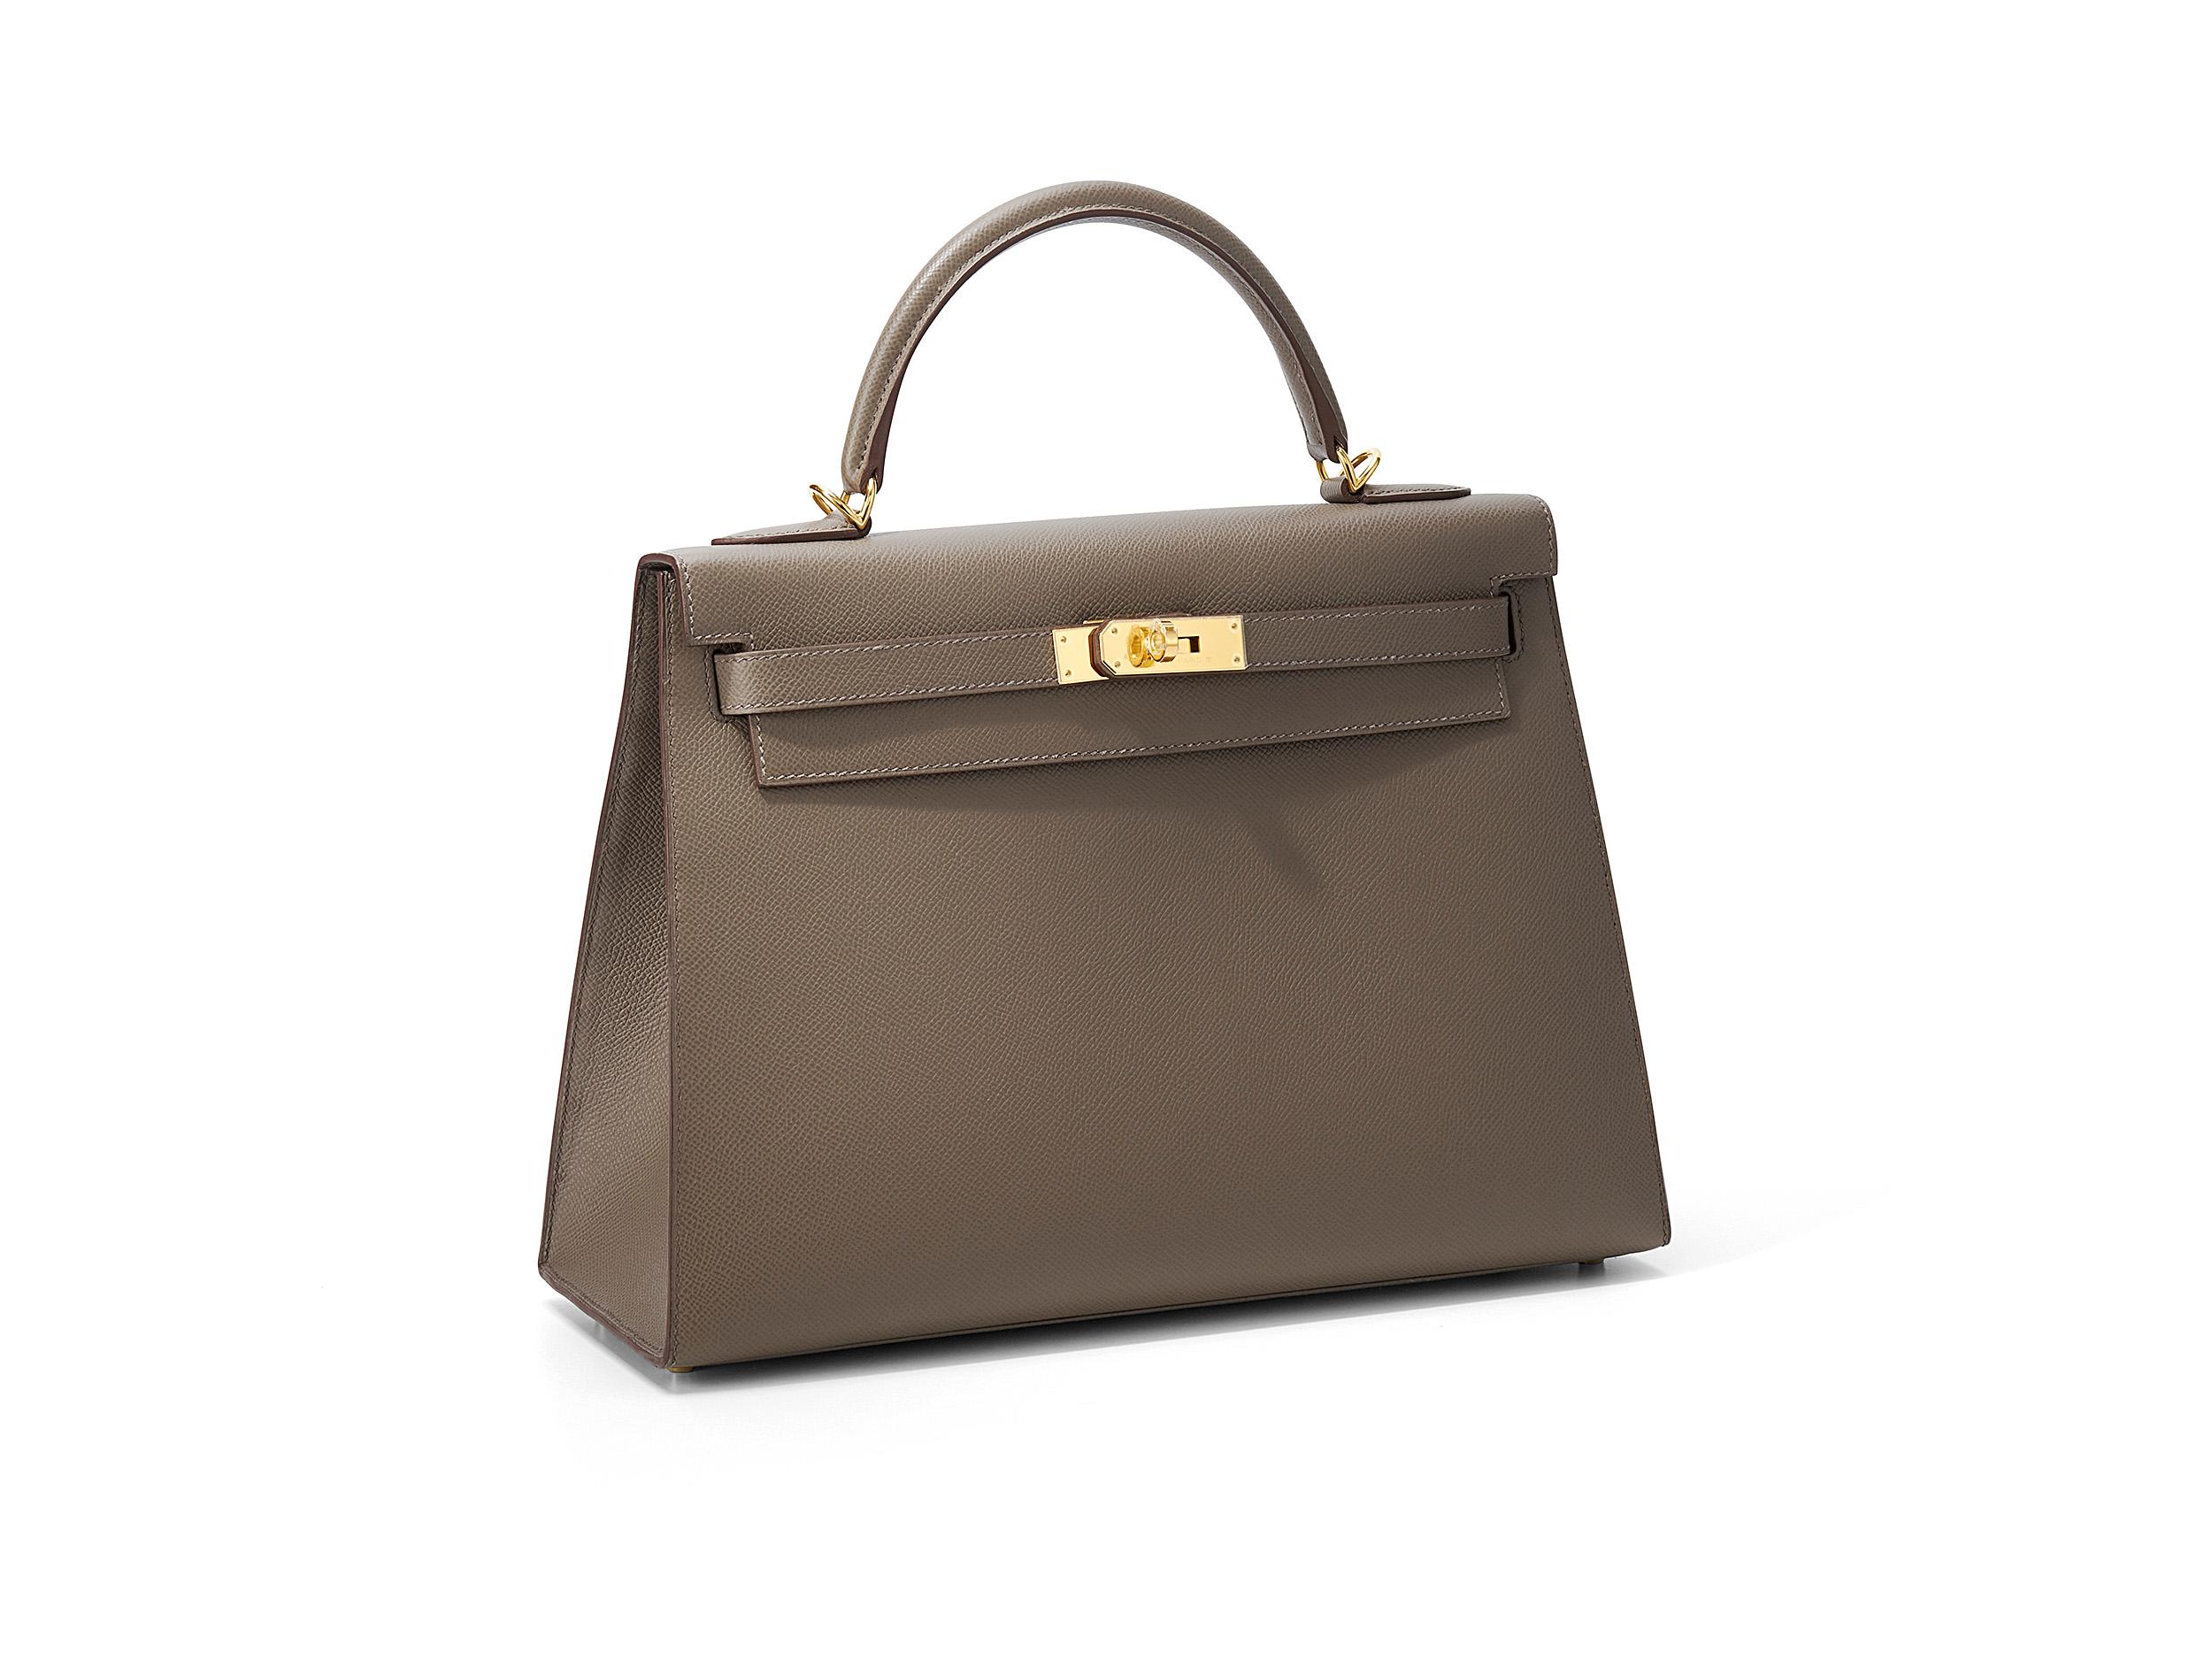 Hermès Kelly Sellier 32 in gris etain and epsom leather with gold hardware. The bag is unworn and comes as full set including the original receipt.

Stamp Y (2020) 

